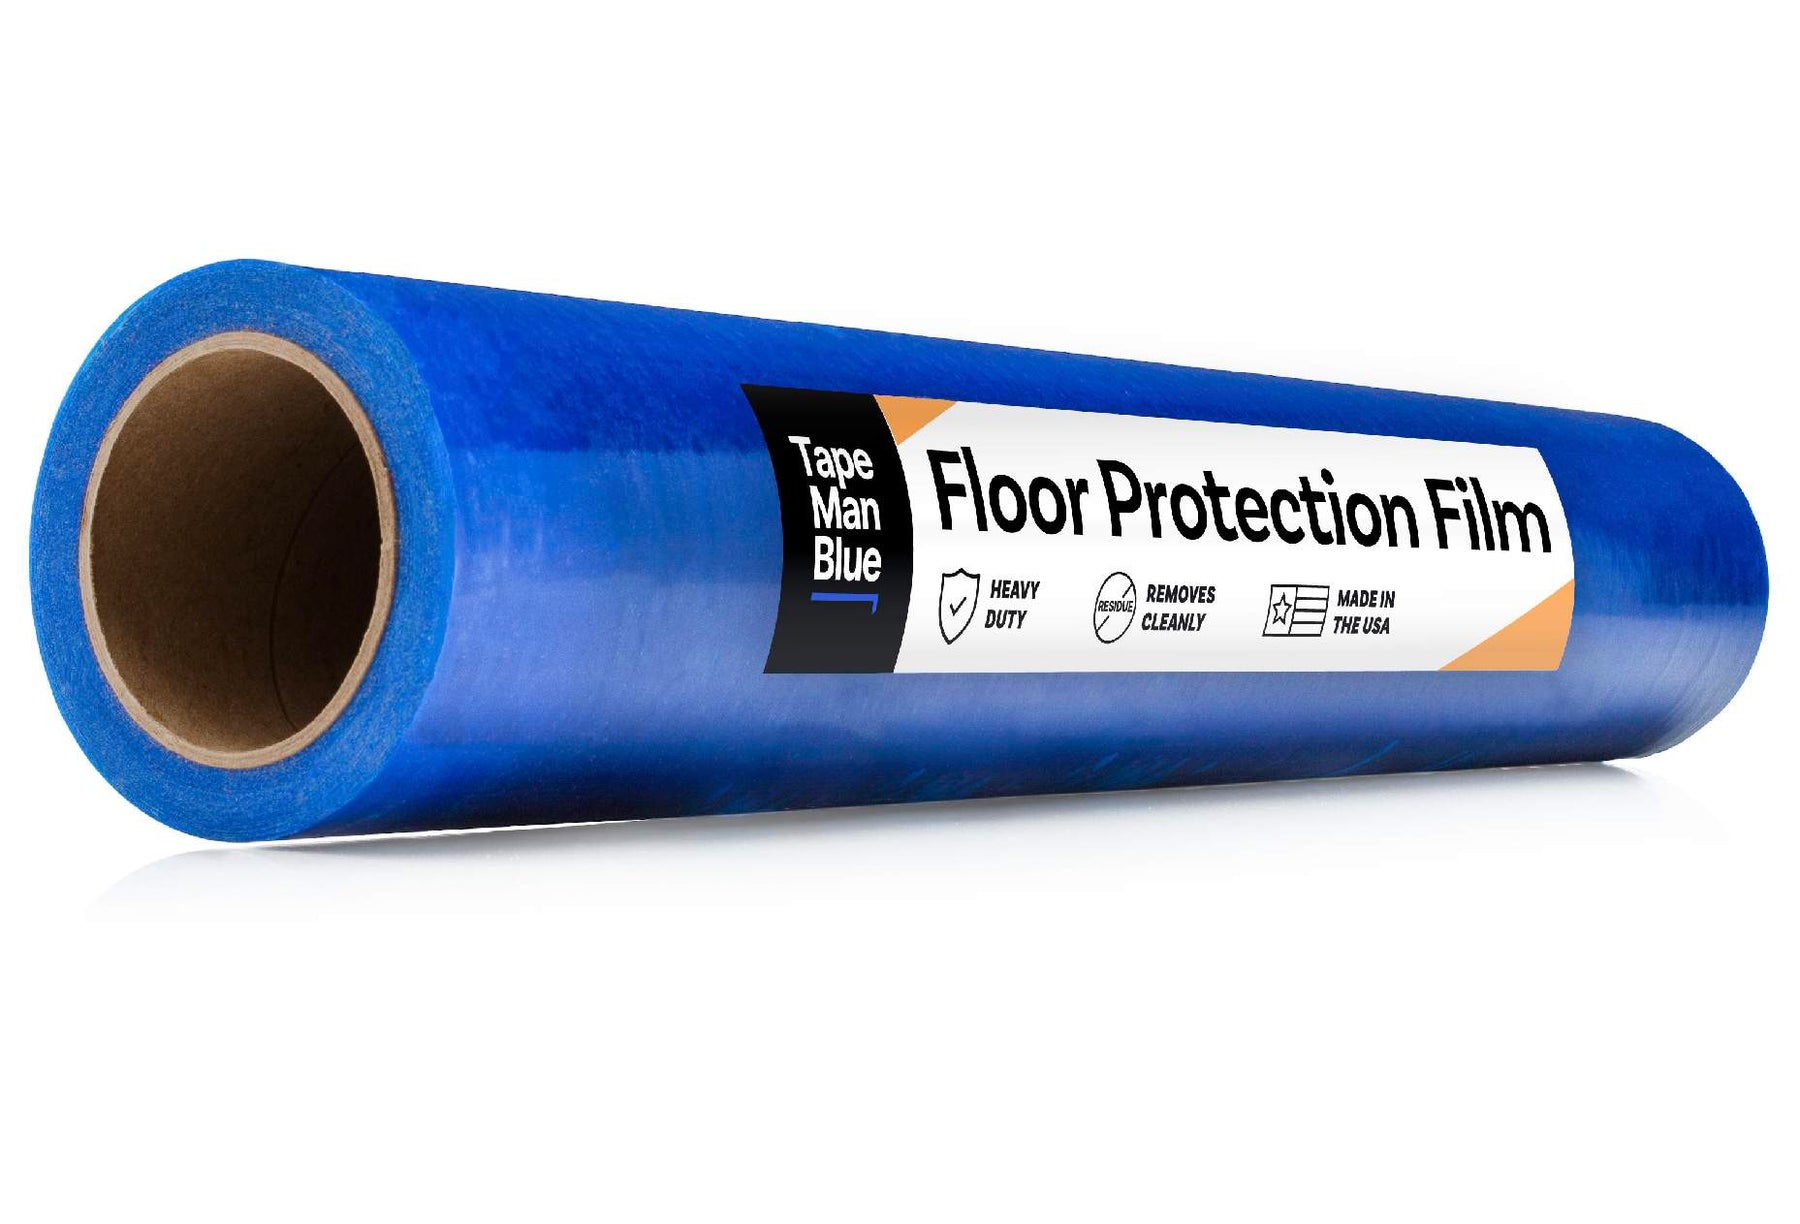 Floor Protection Film, 24 inch x 200' roll, Made in USA, Blue Self